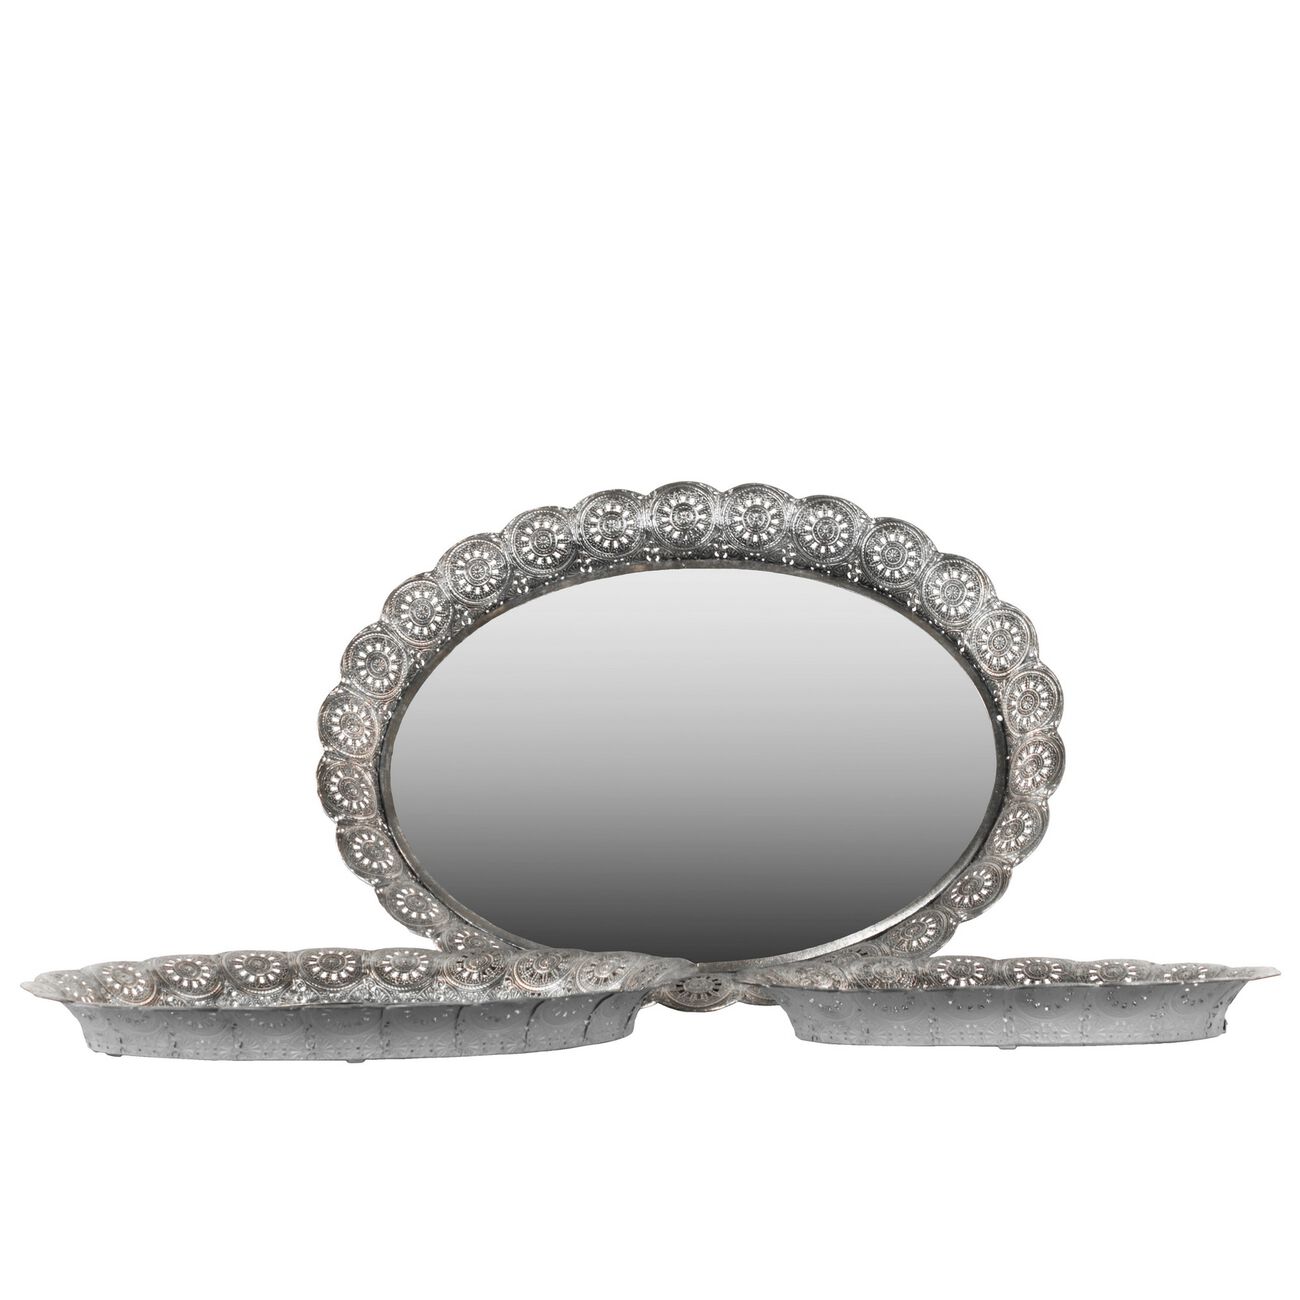 Oval Shape Metal Tray with Pierced Sides and Mirror Surface,Set of 3,Silver